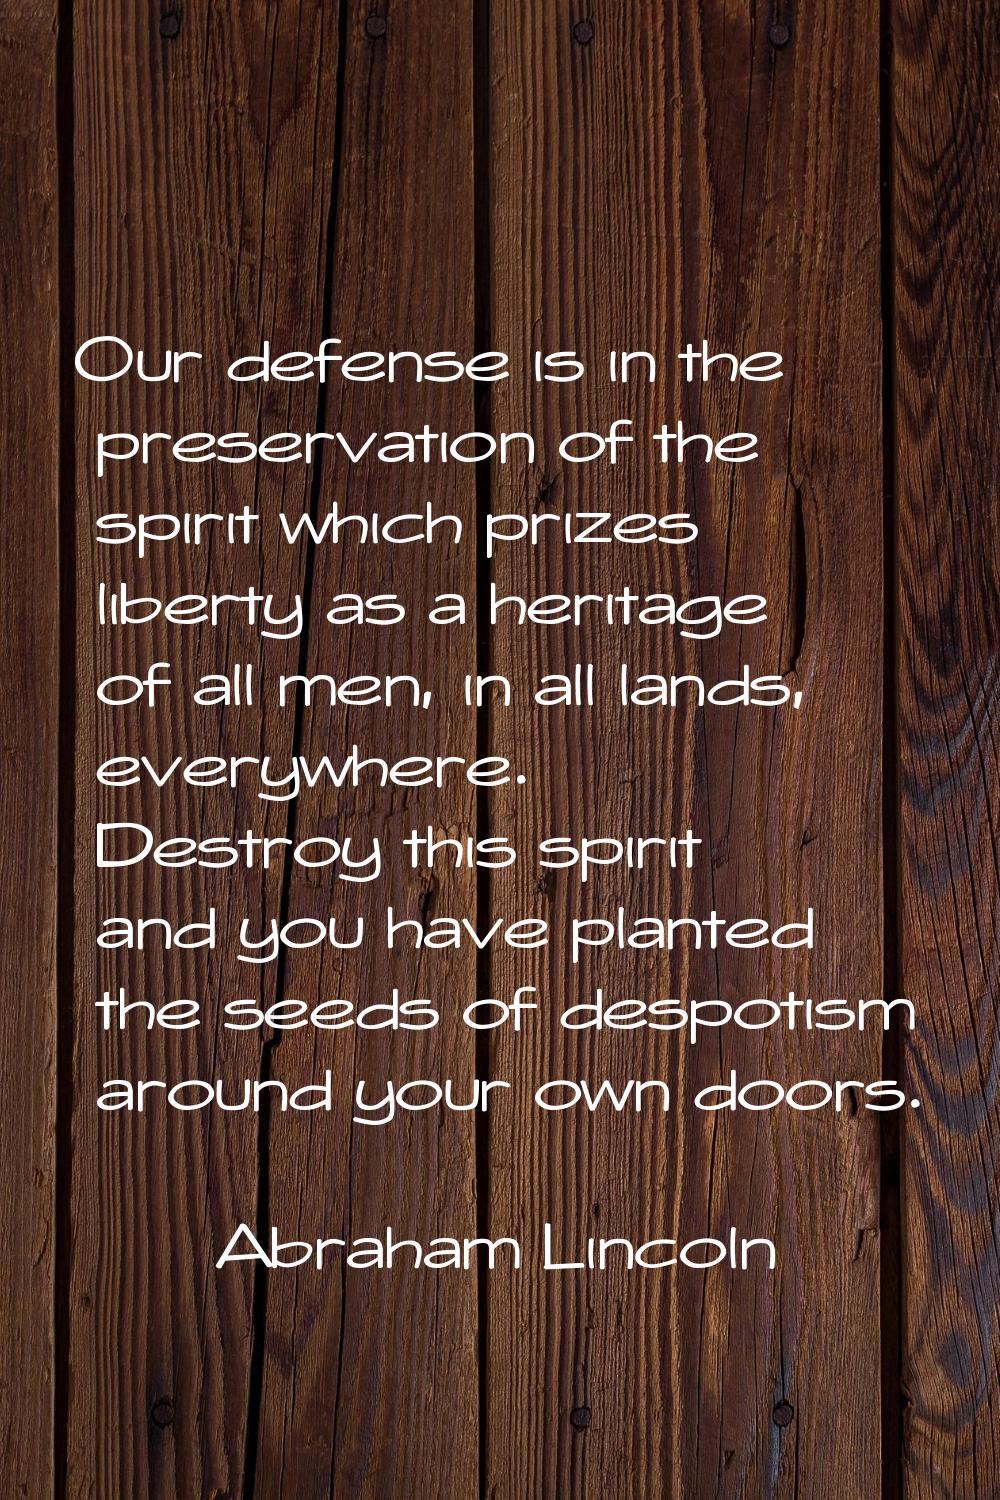 Our defense is in the preservation of the spirit which prizes liberty as a heritage of all men, in 